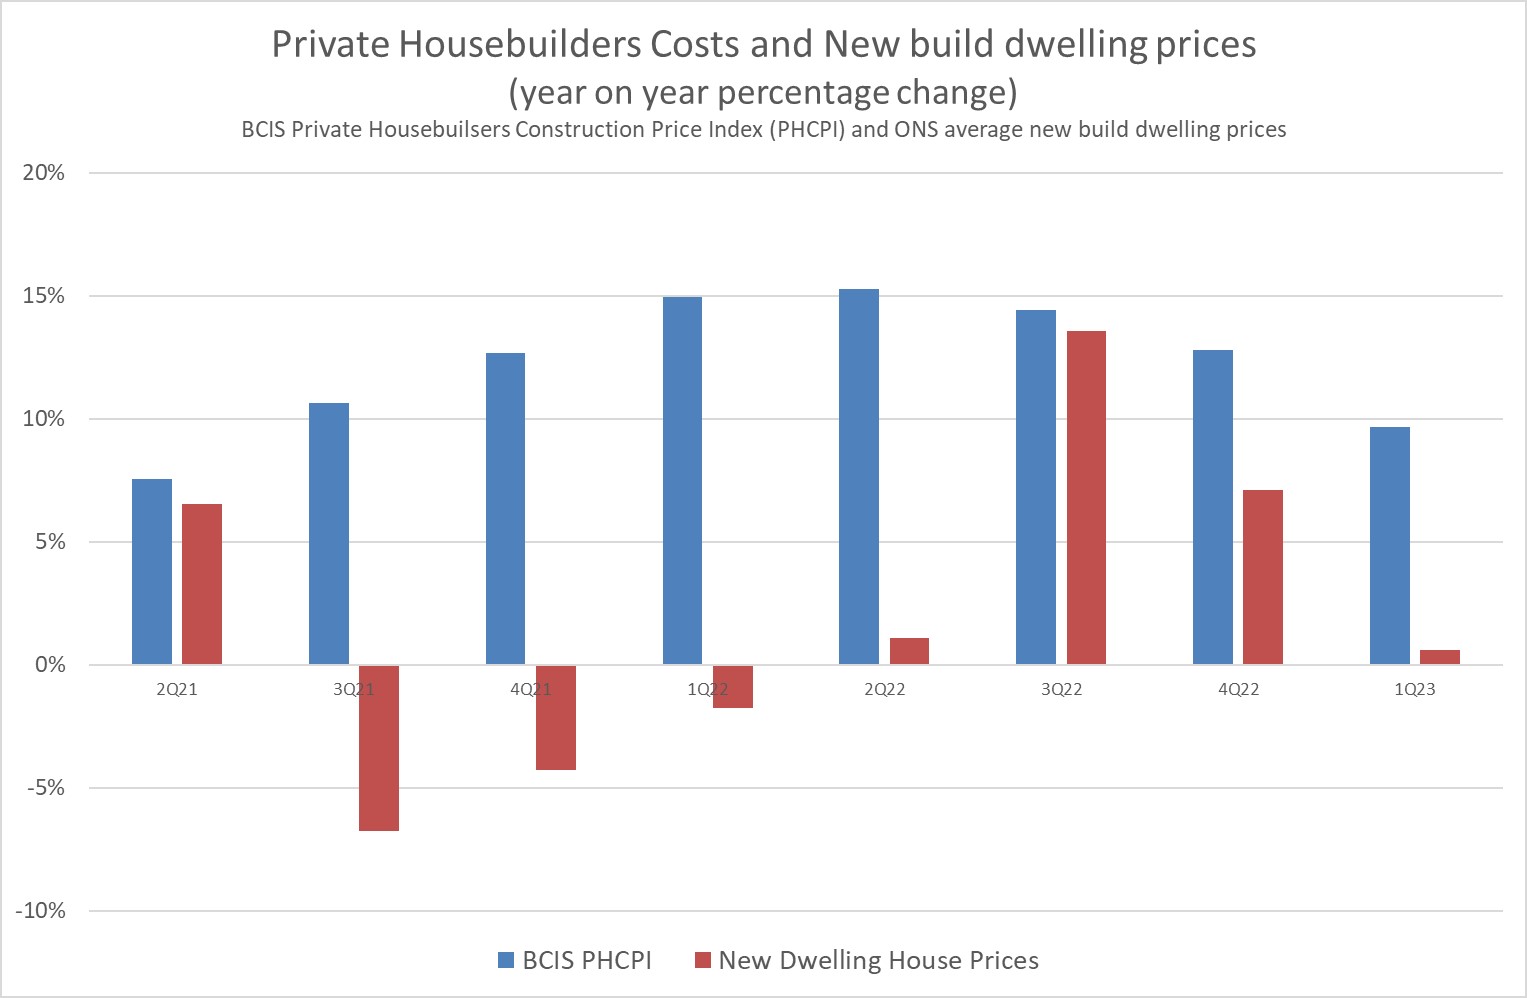 private housebuilder costs and new build dwelling prices graph